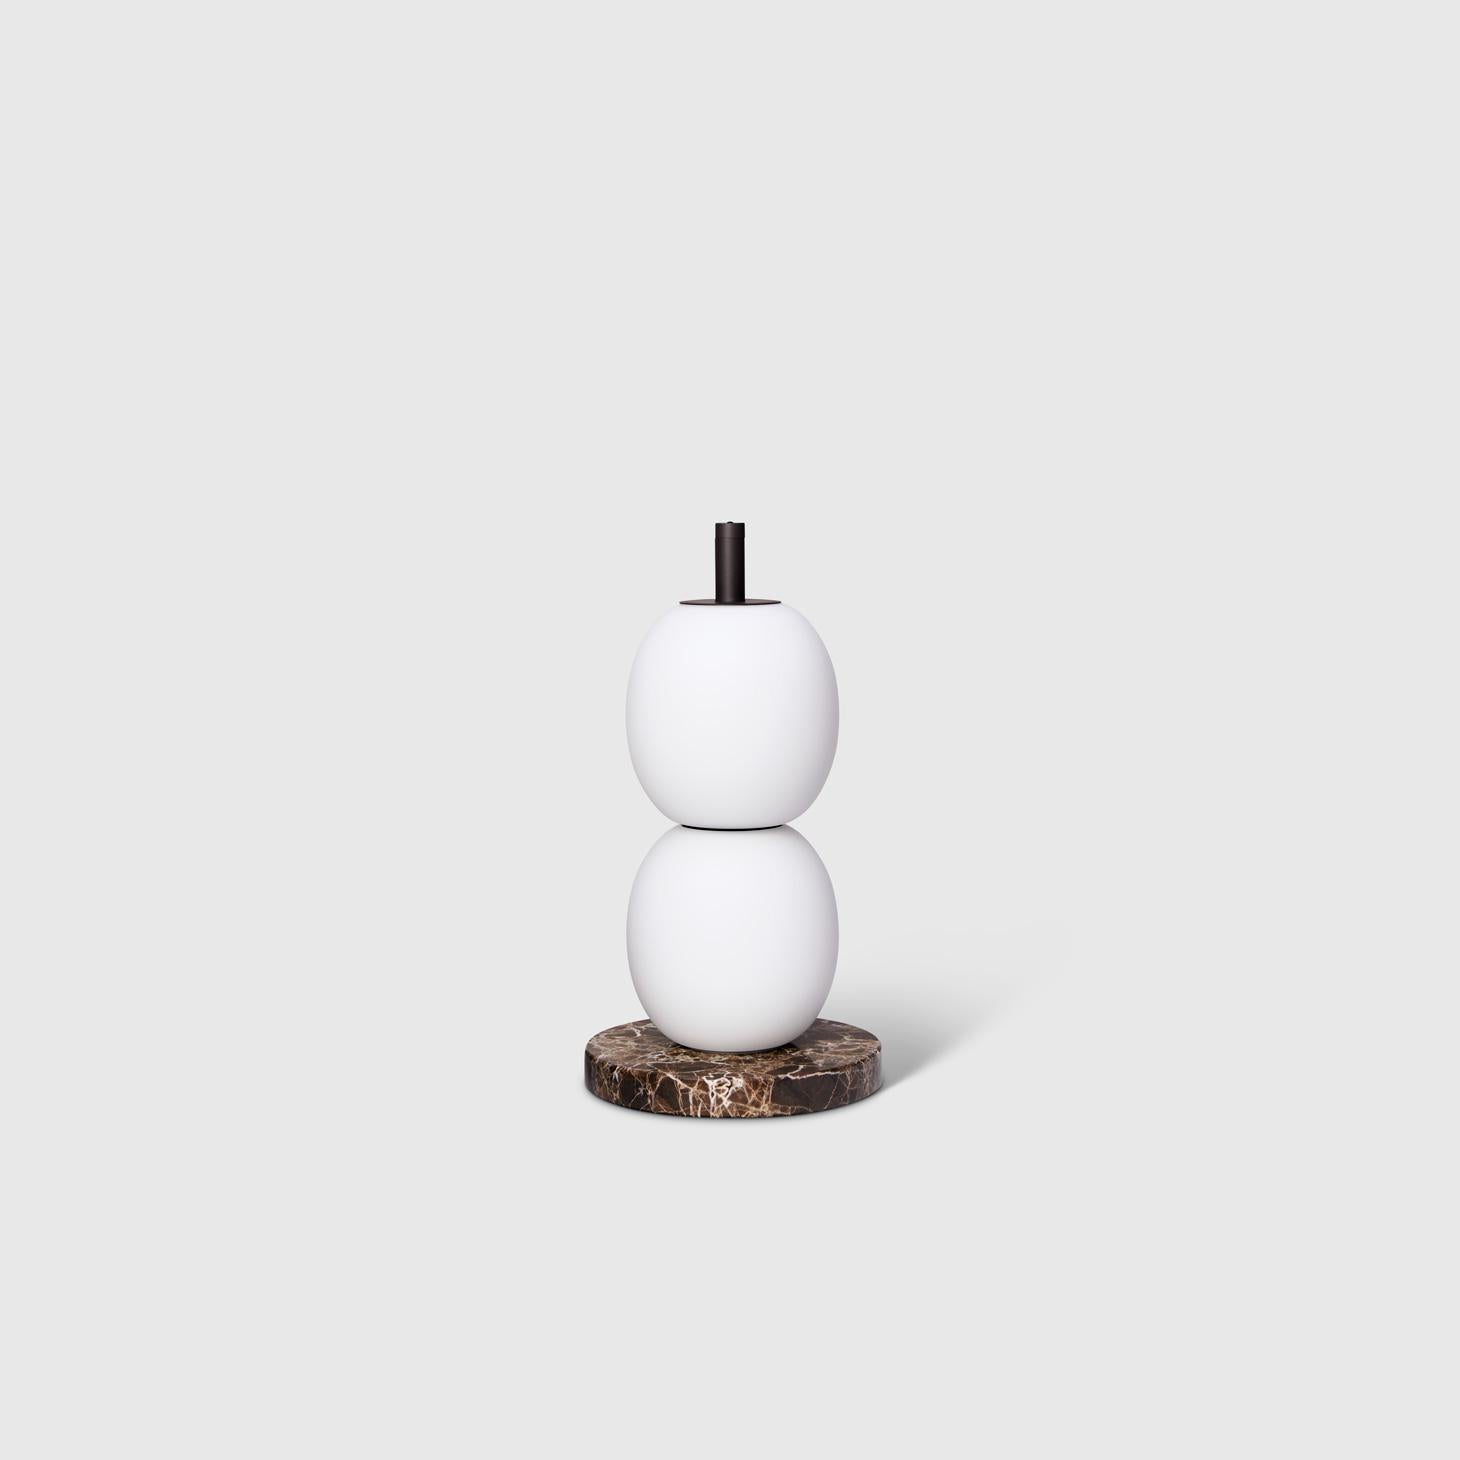 The Mainkai table lamp by Sebastian Herkner matches his playful shapes with sophisticated materials. The lamp’s integrated button on the top stem dims the glow of its hand blown glass globes. The LED light has a balanced color temperature of 2700K